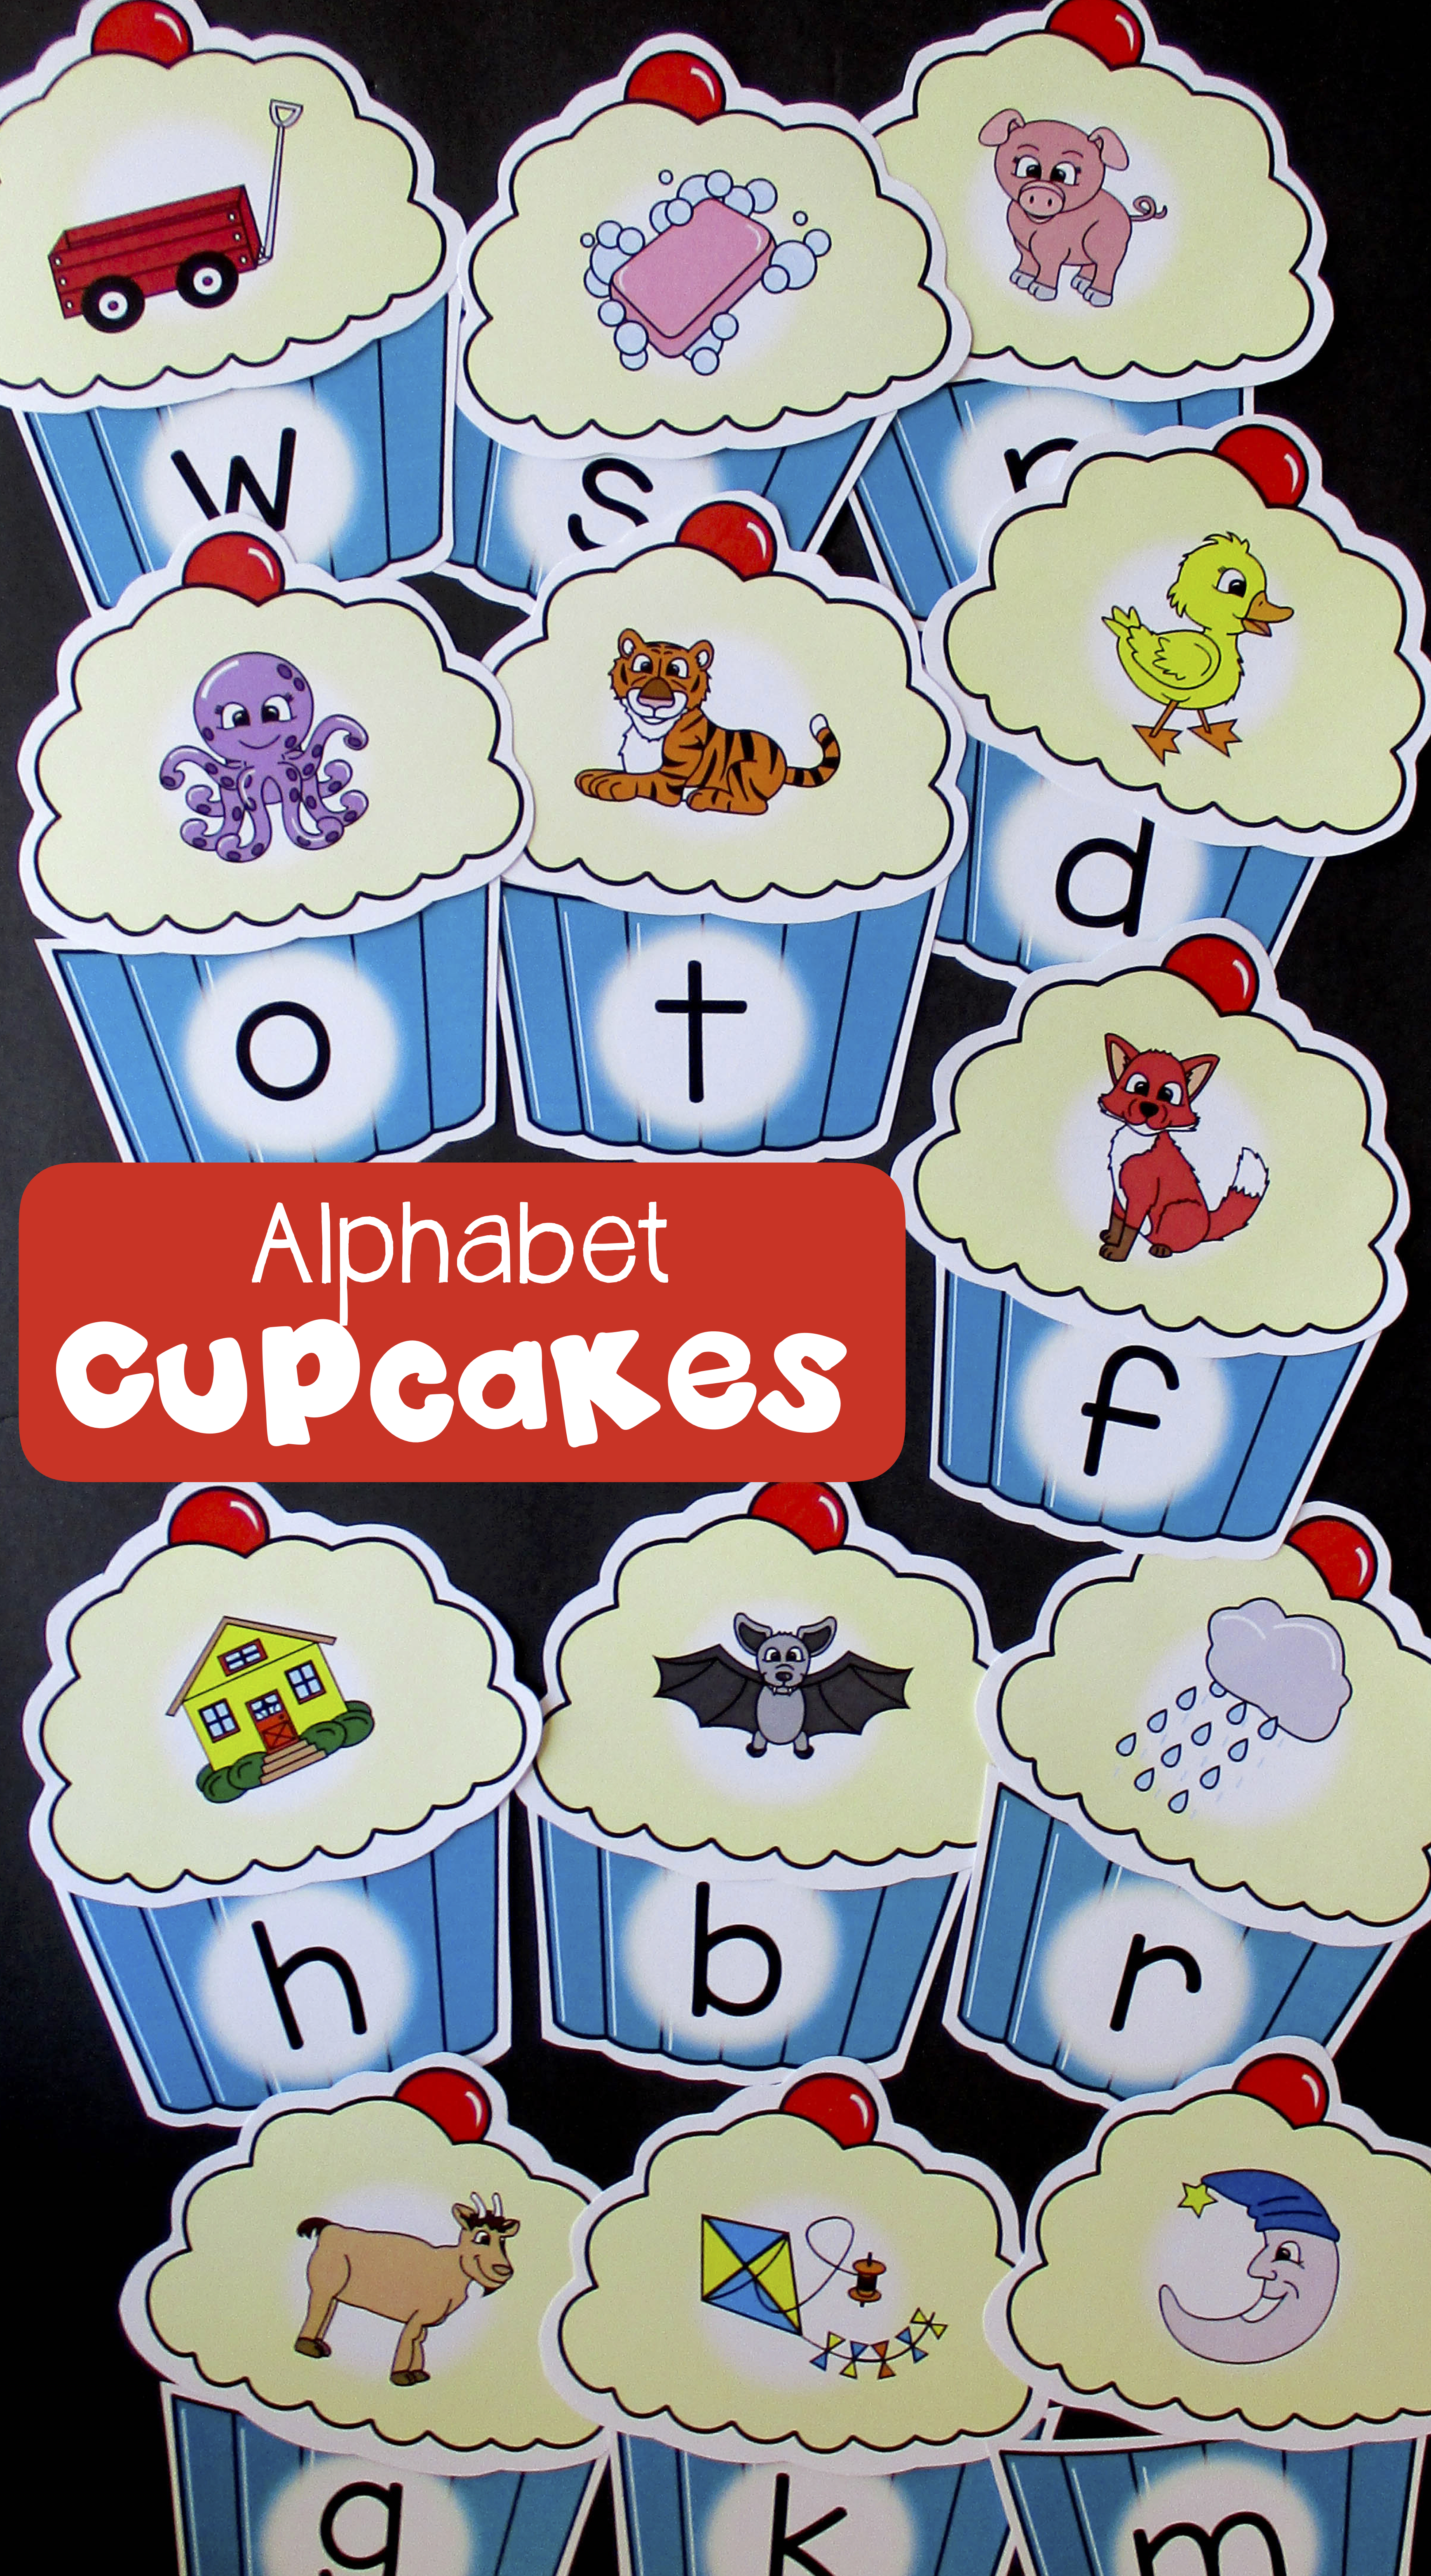 Alphabet Cupcakes learning activities matching upper-lower case printable